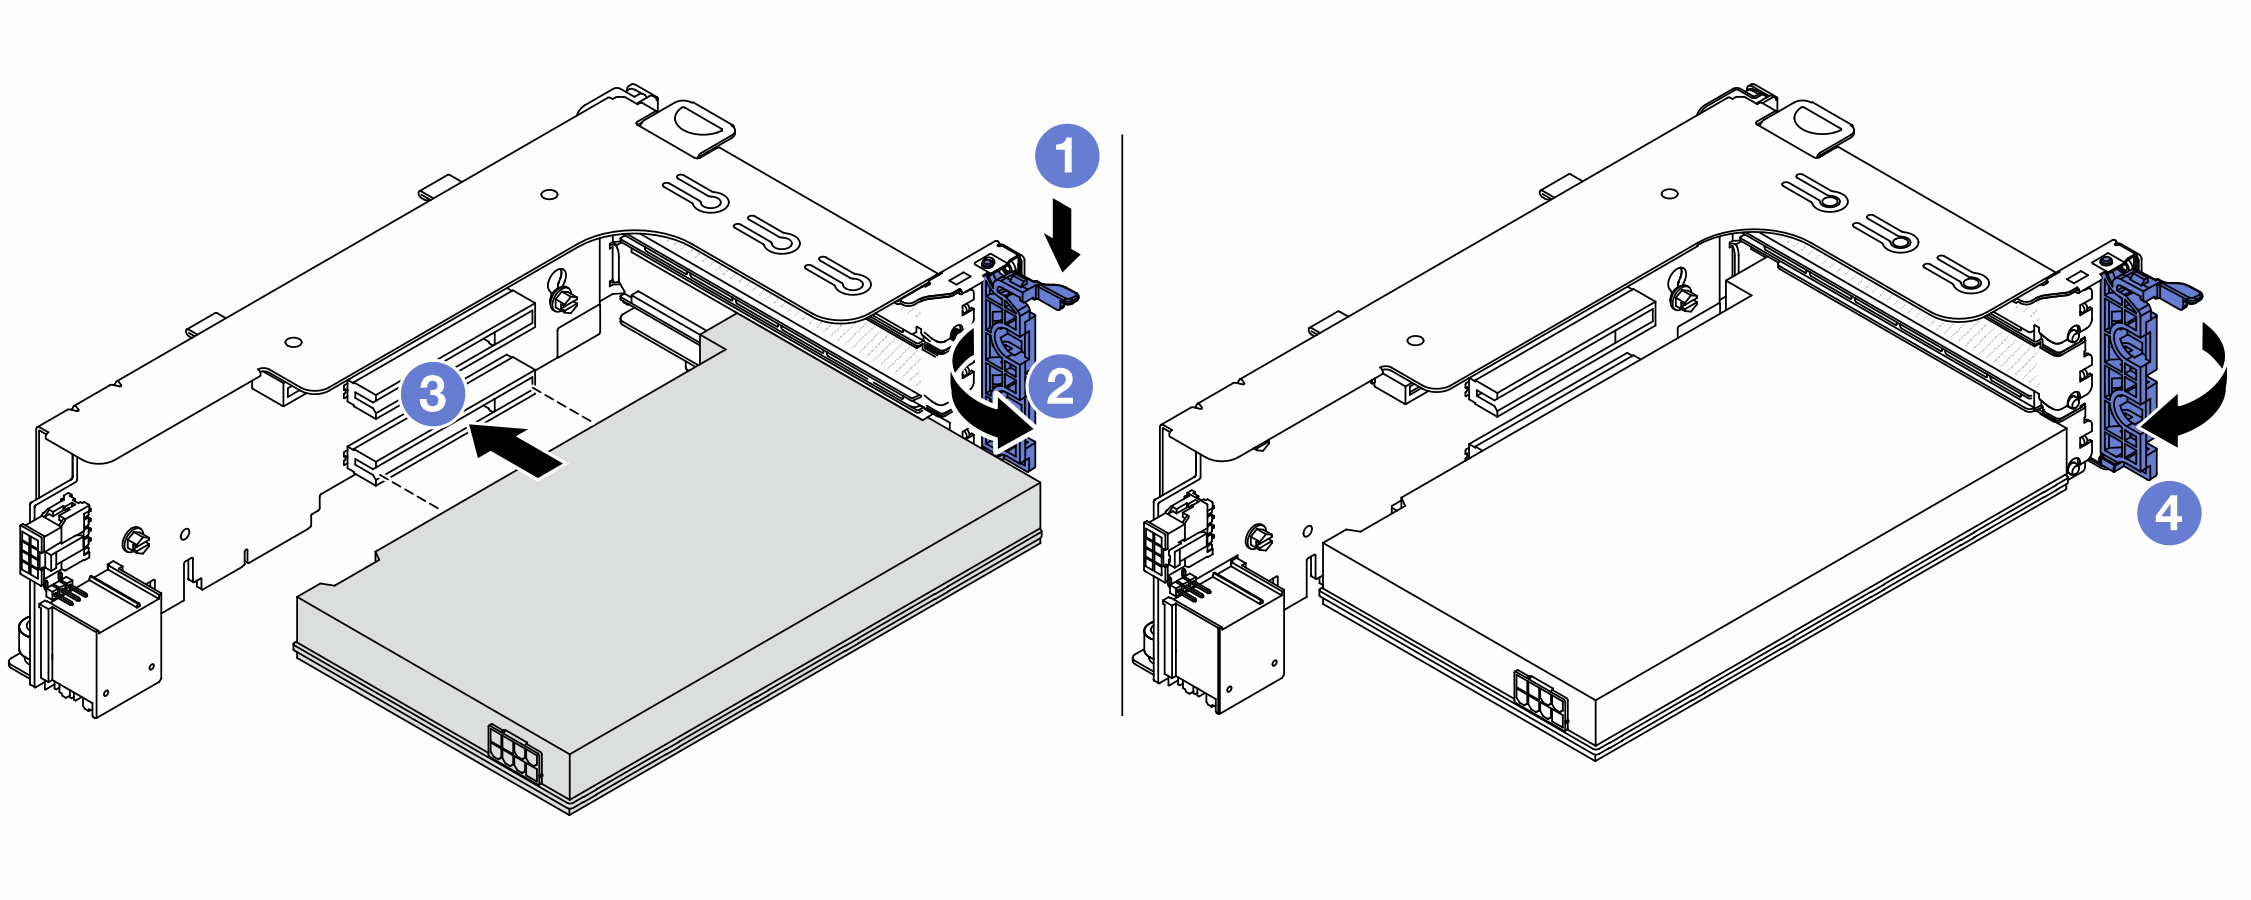 Installing a PCIe adapter to riser 1 cage or riser 2 cage